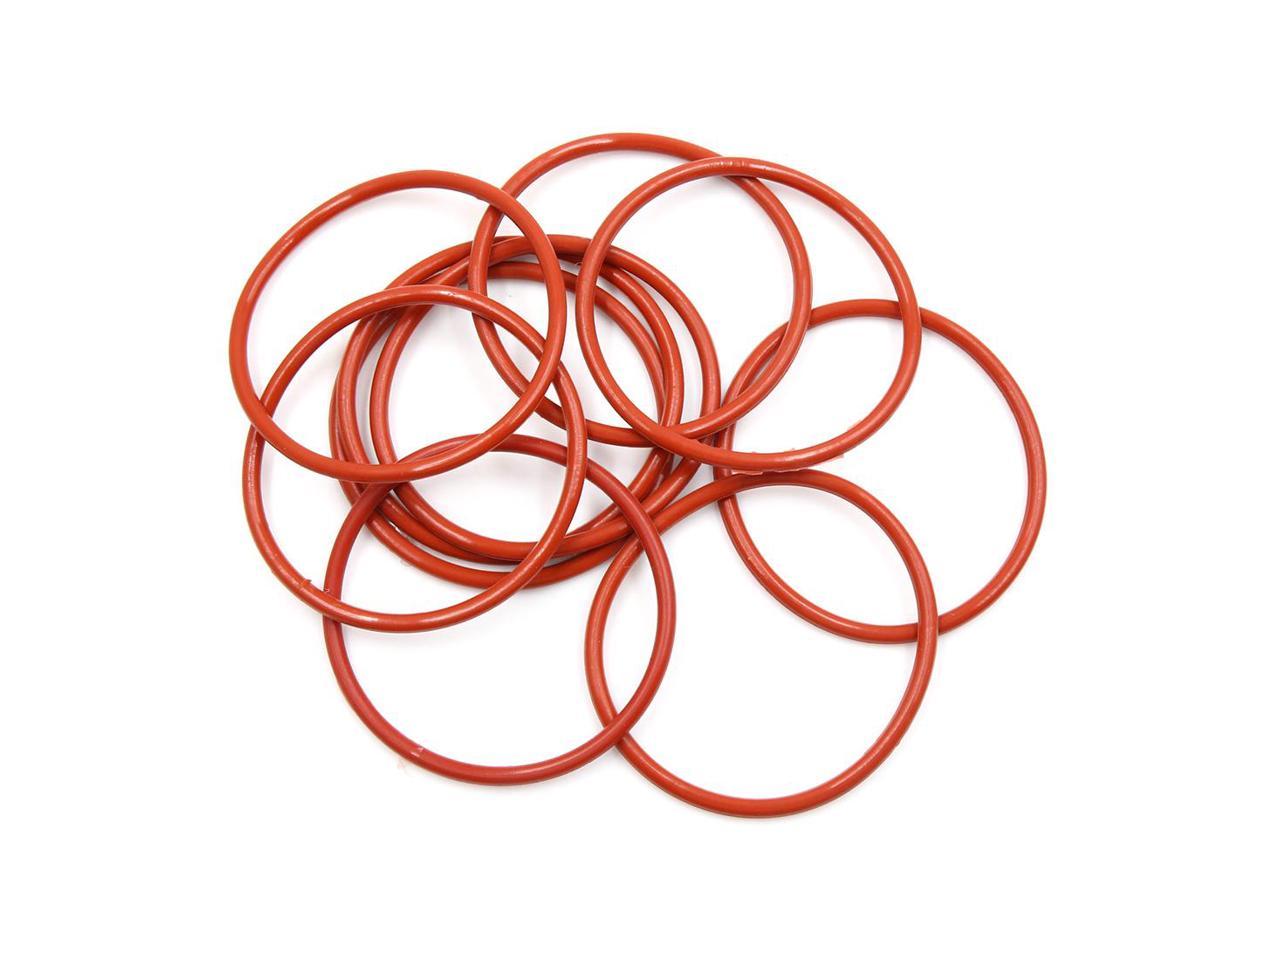 3.3 Feet Select Size Diameter 1.5mm to 12mm VMQ Silicone O-Ring Gaskets Cord 